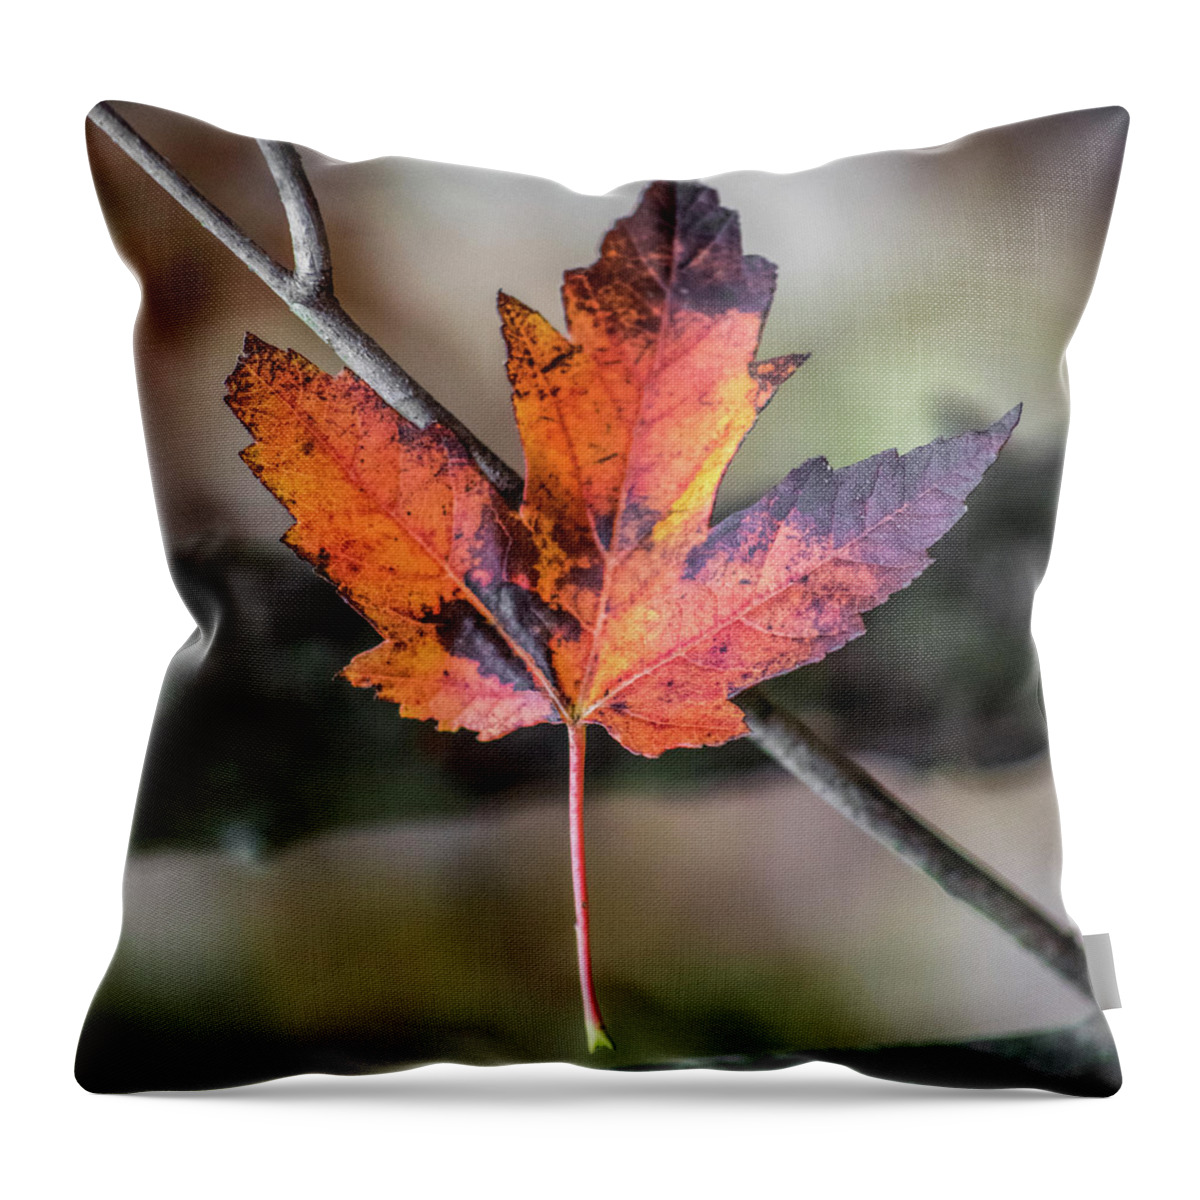 Archbold Throw Pillow featuring the photograph Maple 1 by Michael Arend